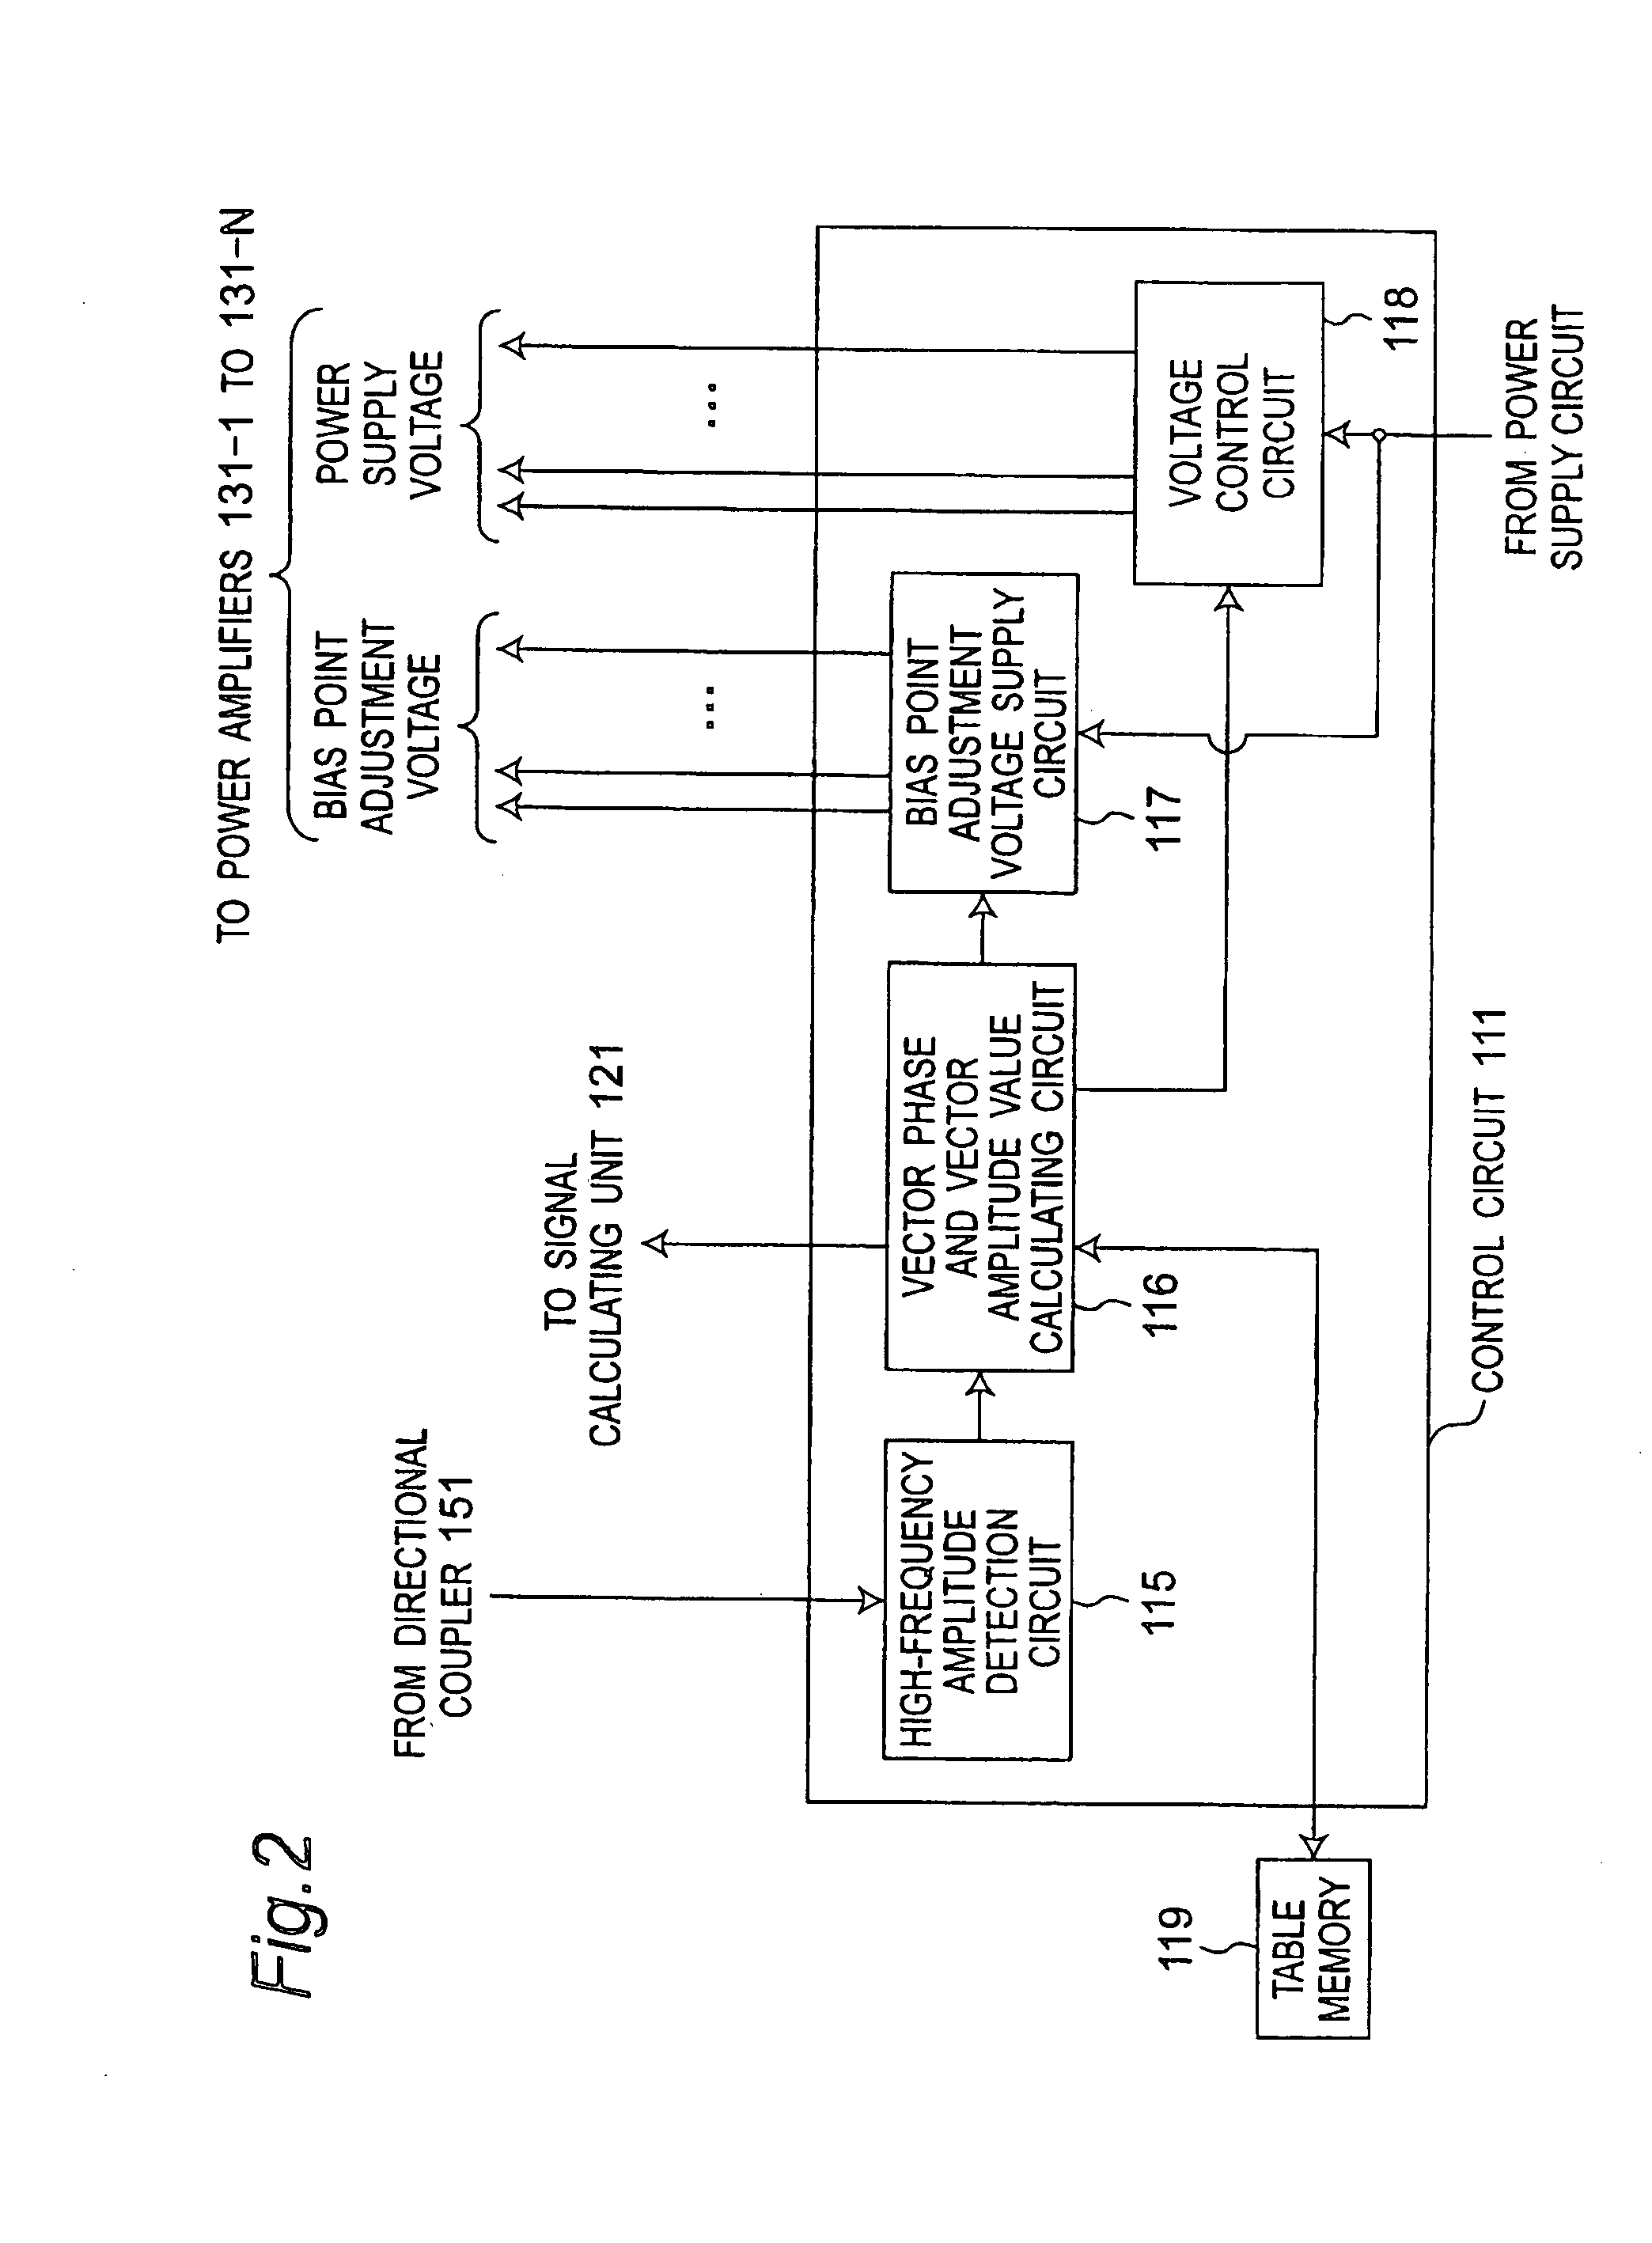 Transmission power amplifier apparatus for combining power-amplified constant amplitude signals each having controlled constant amplitude value and phase